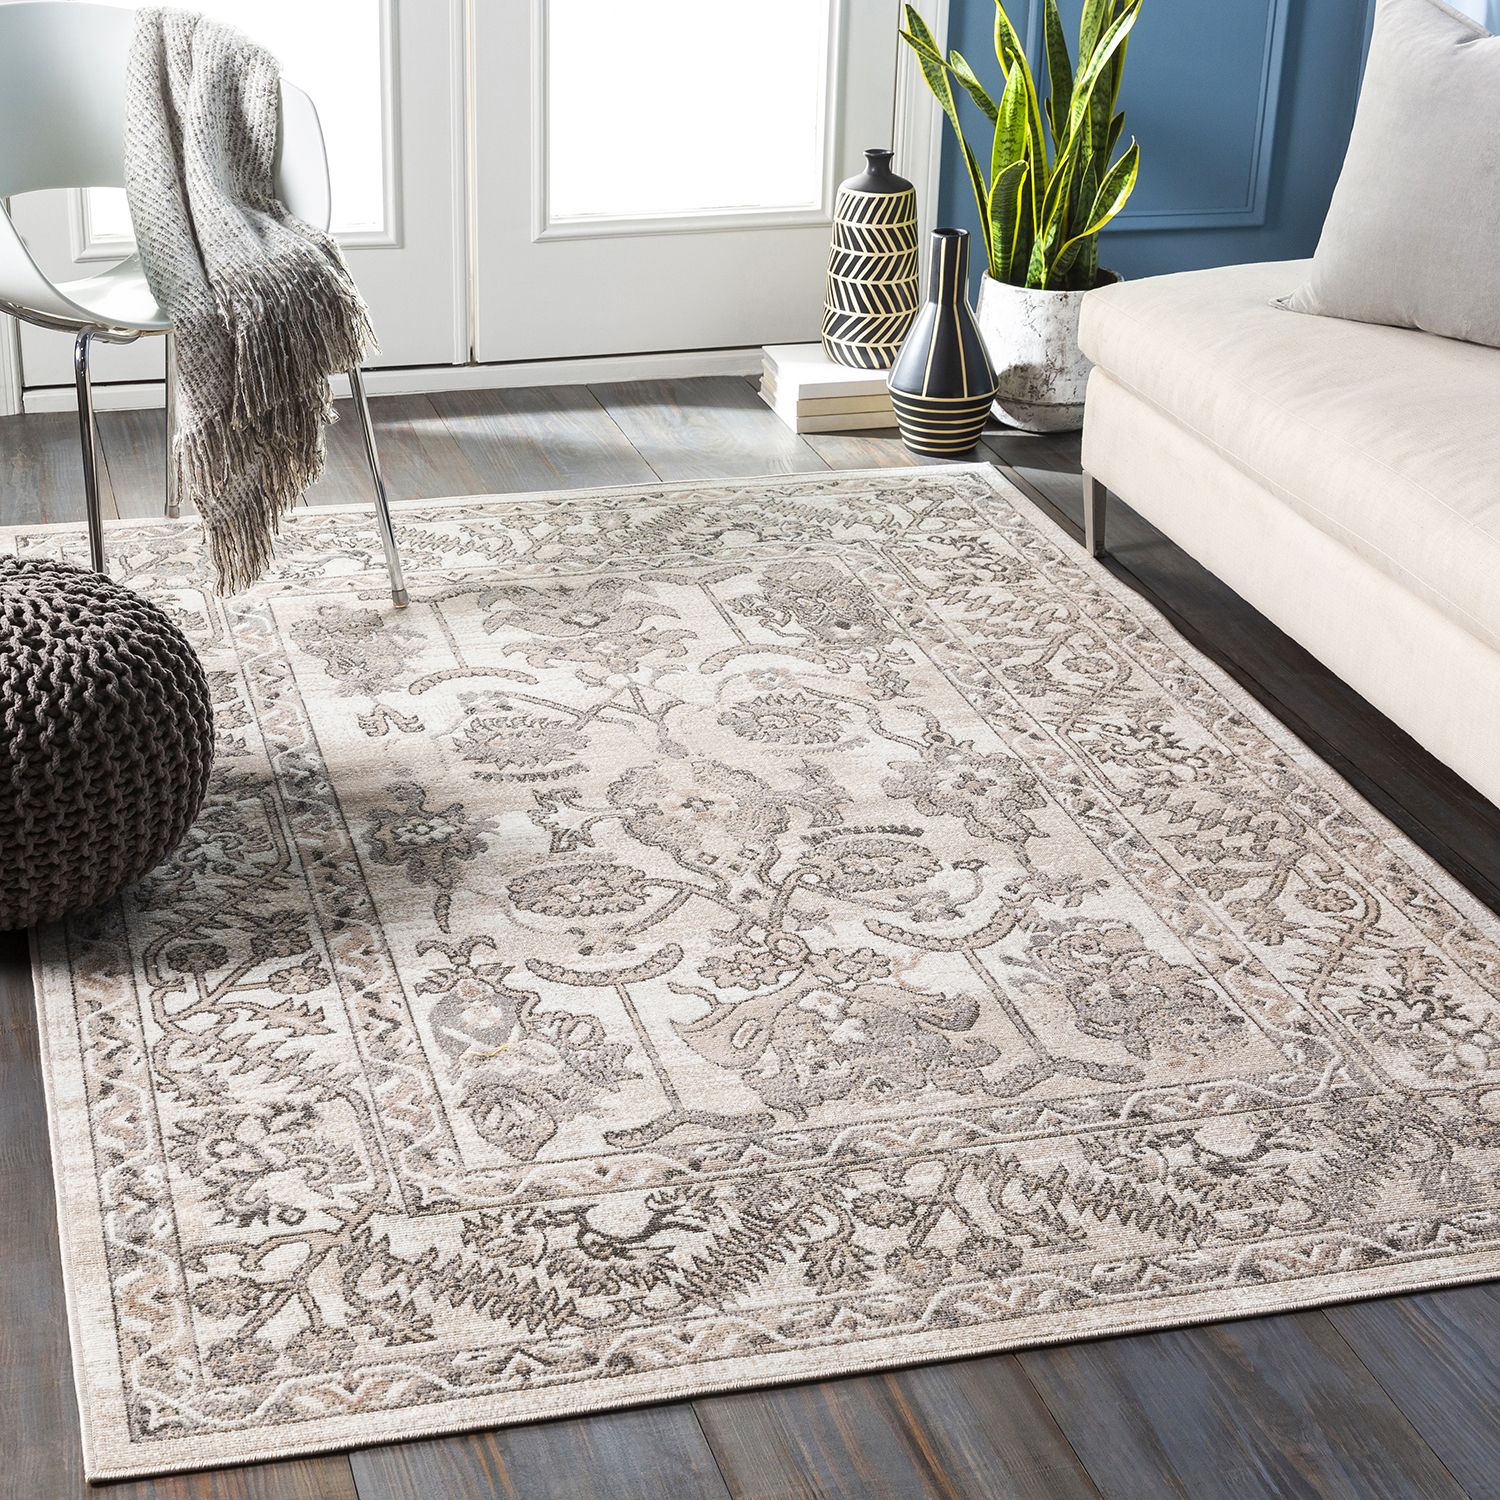 An area rug ties an entire room's look together, and offers cushioning and comfort with every step.